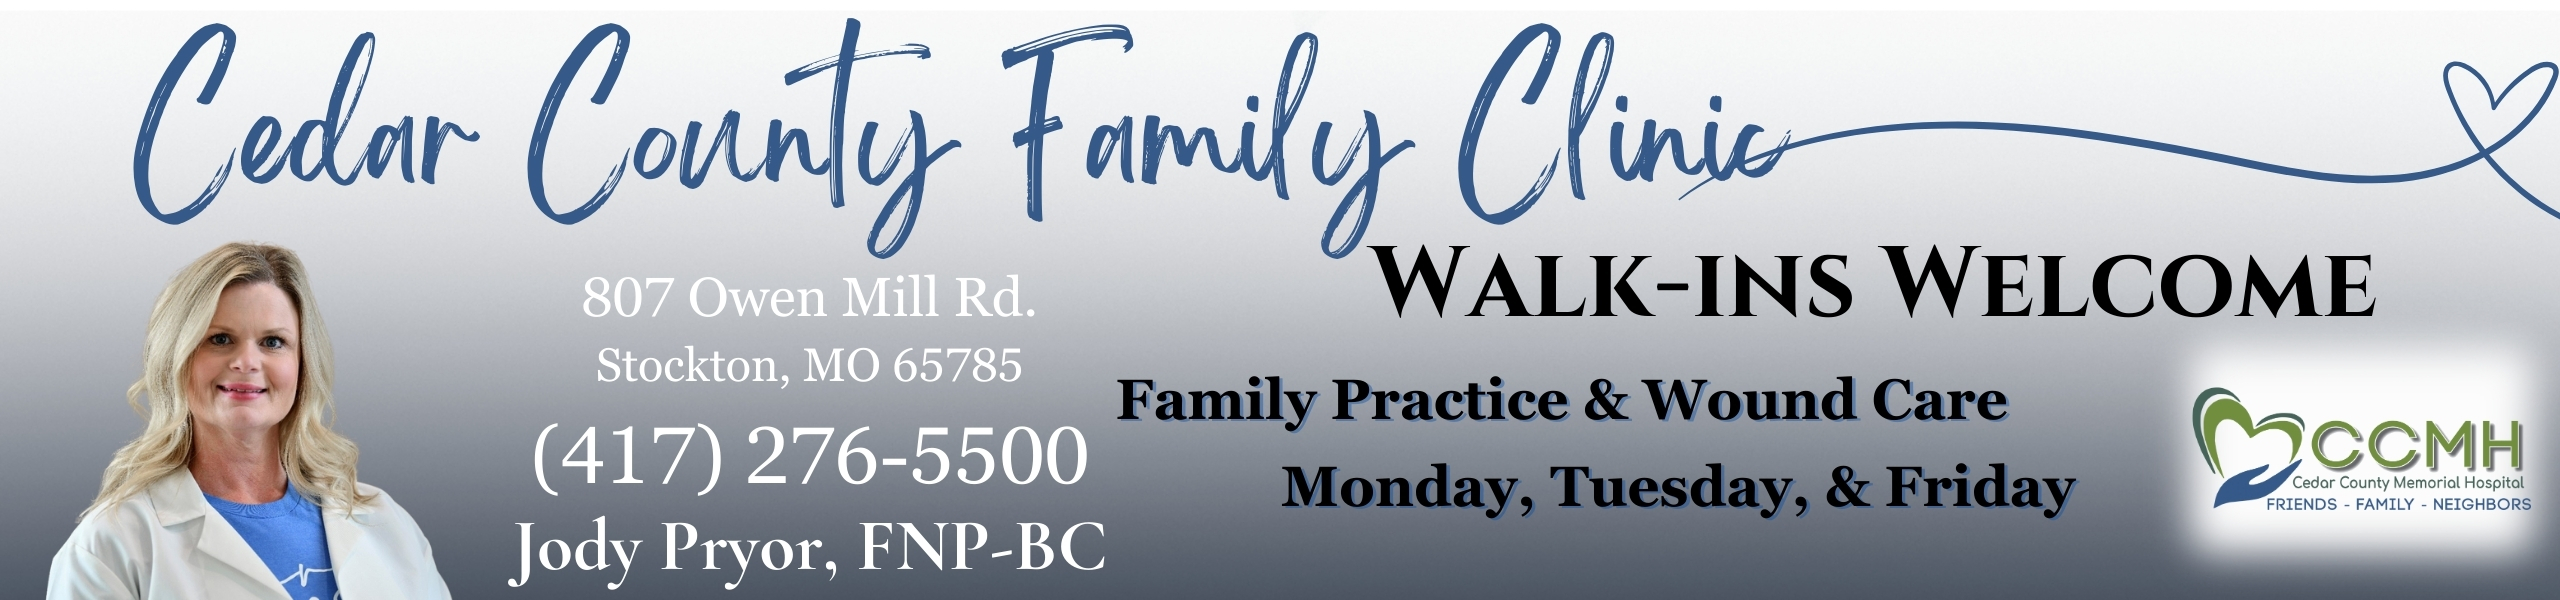 Jody Pryor, FNP-BC Monday, Tuesday, and Friday 

Walk-ins available